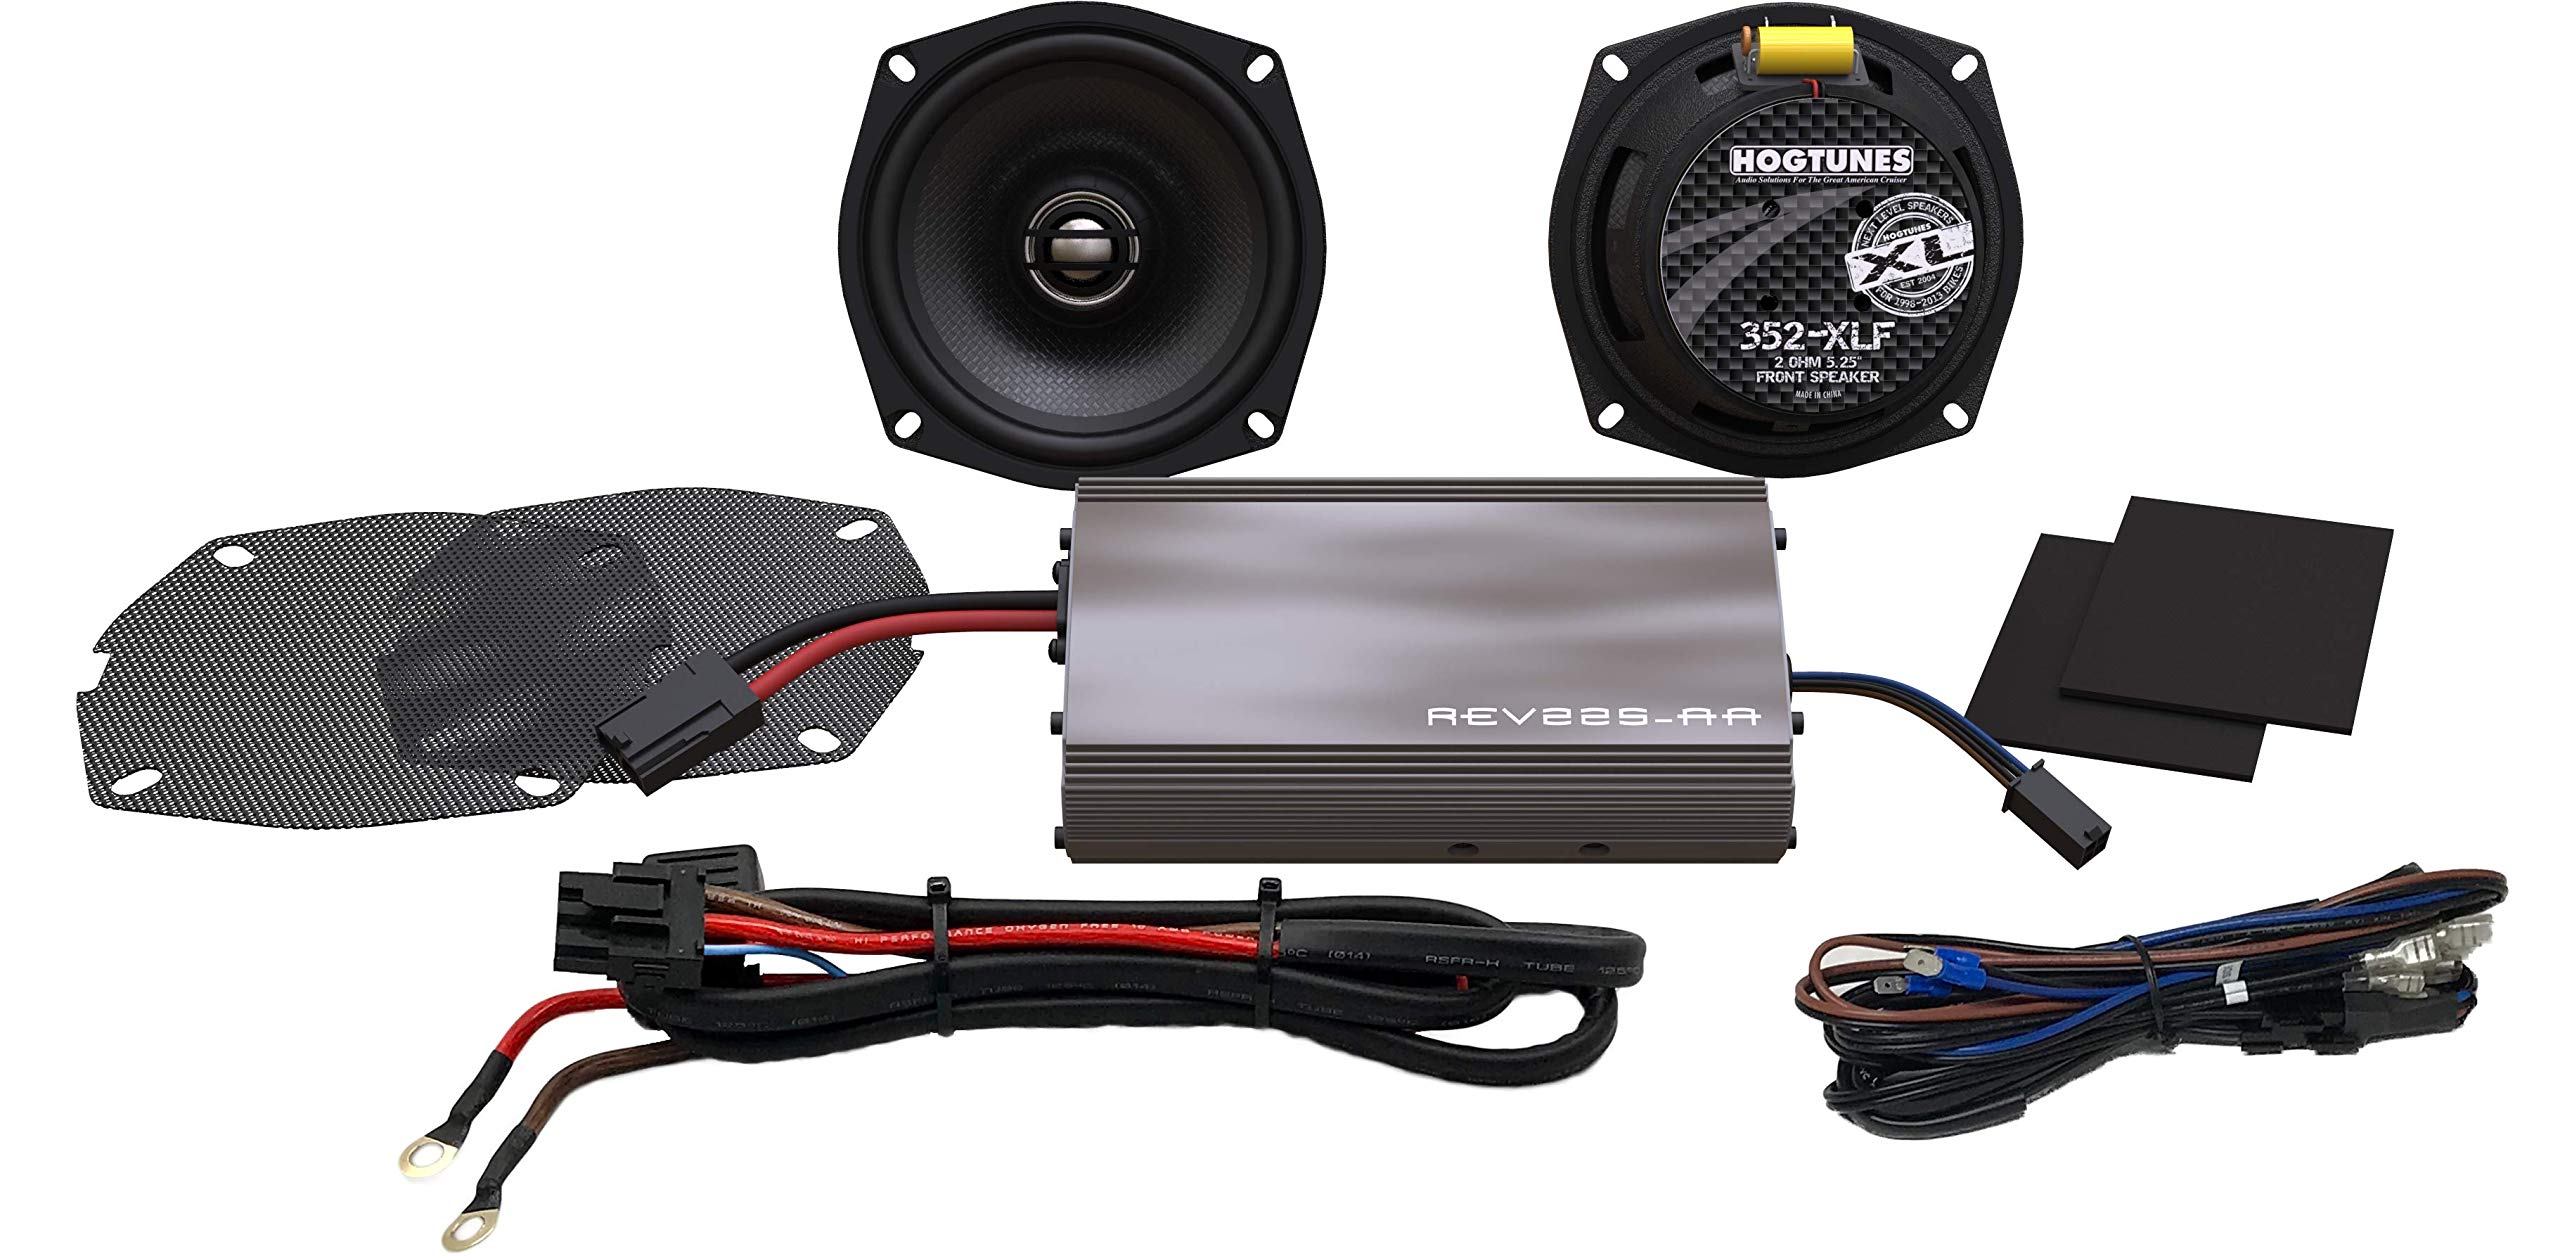 Hogtunes 225 SG KIT-XL with 225 Watt Amplifier and 5.25